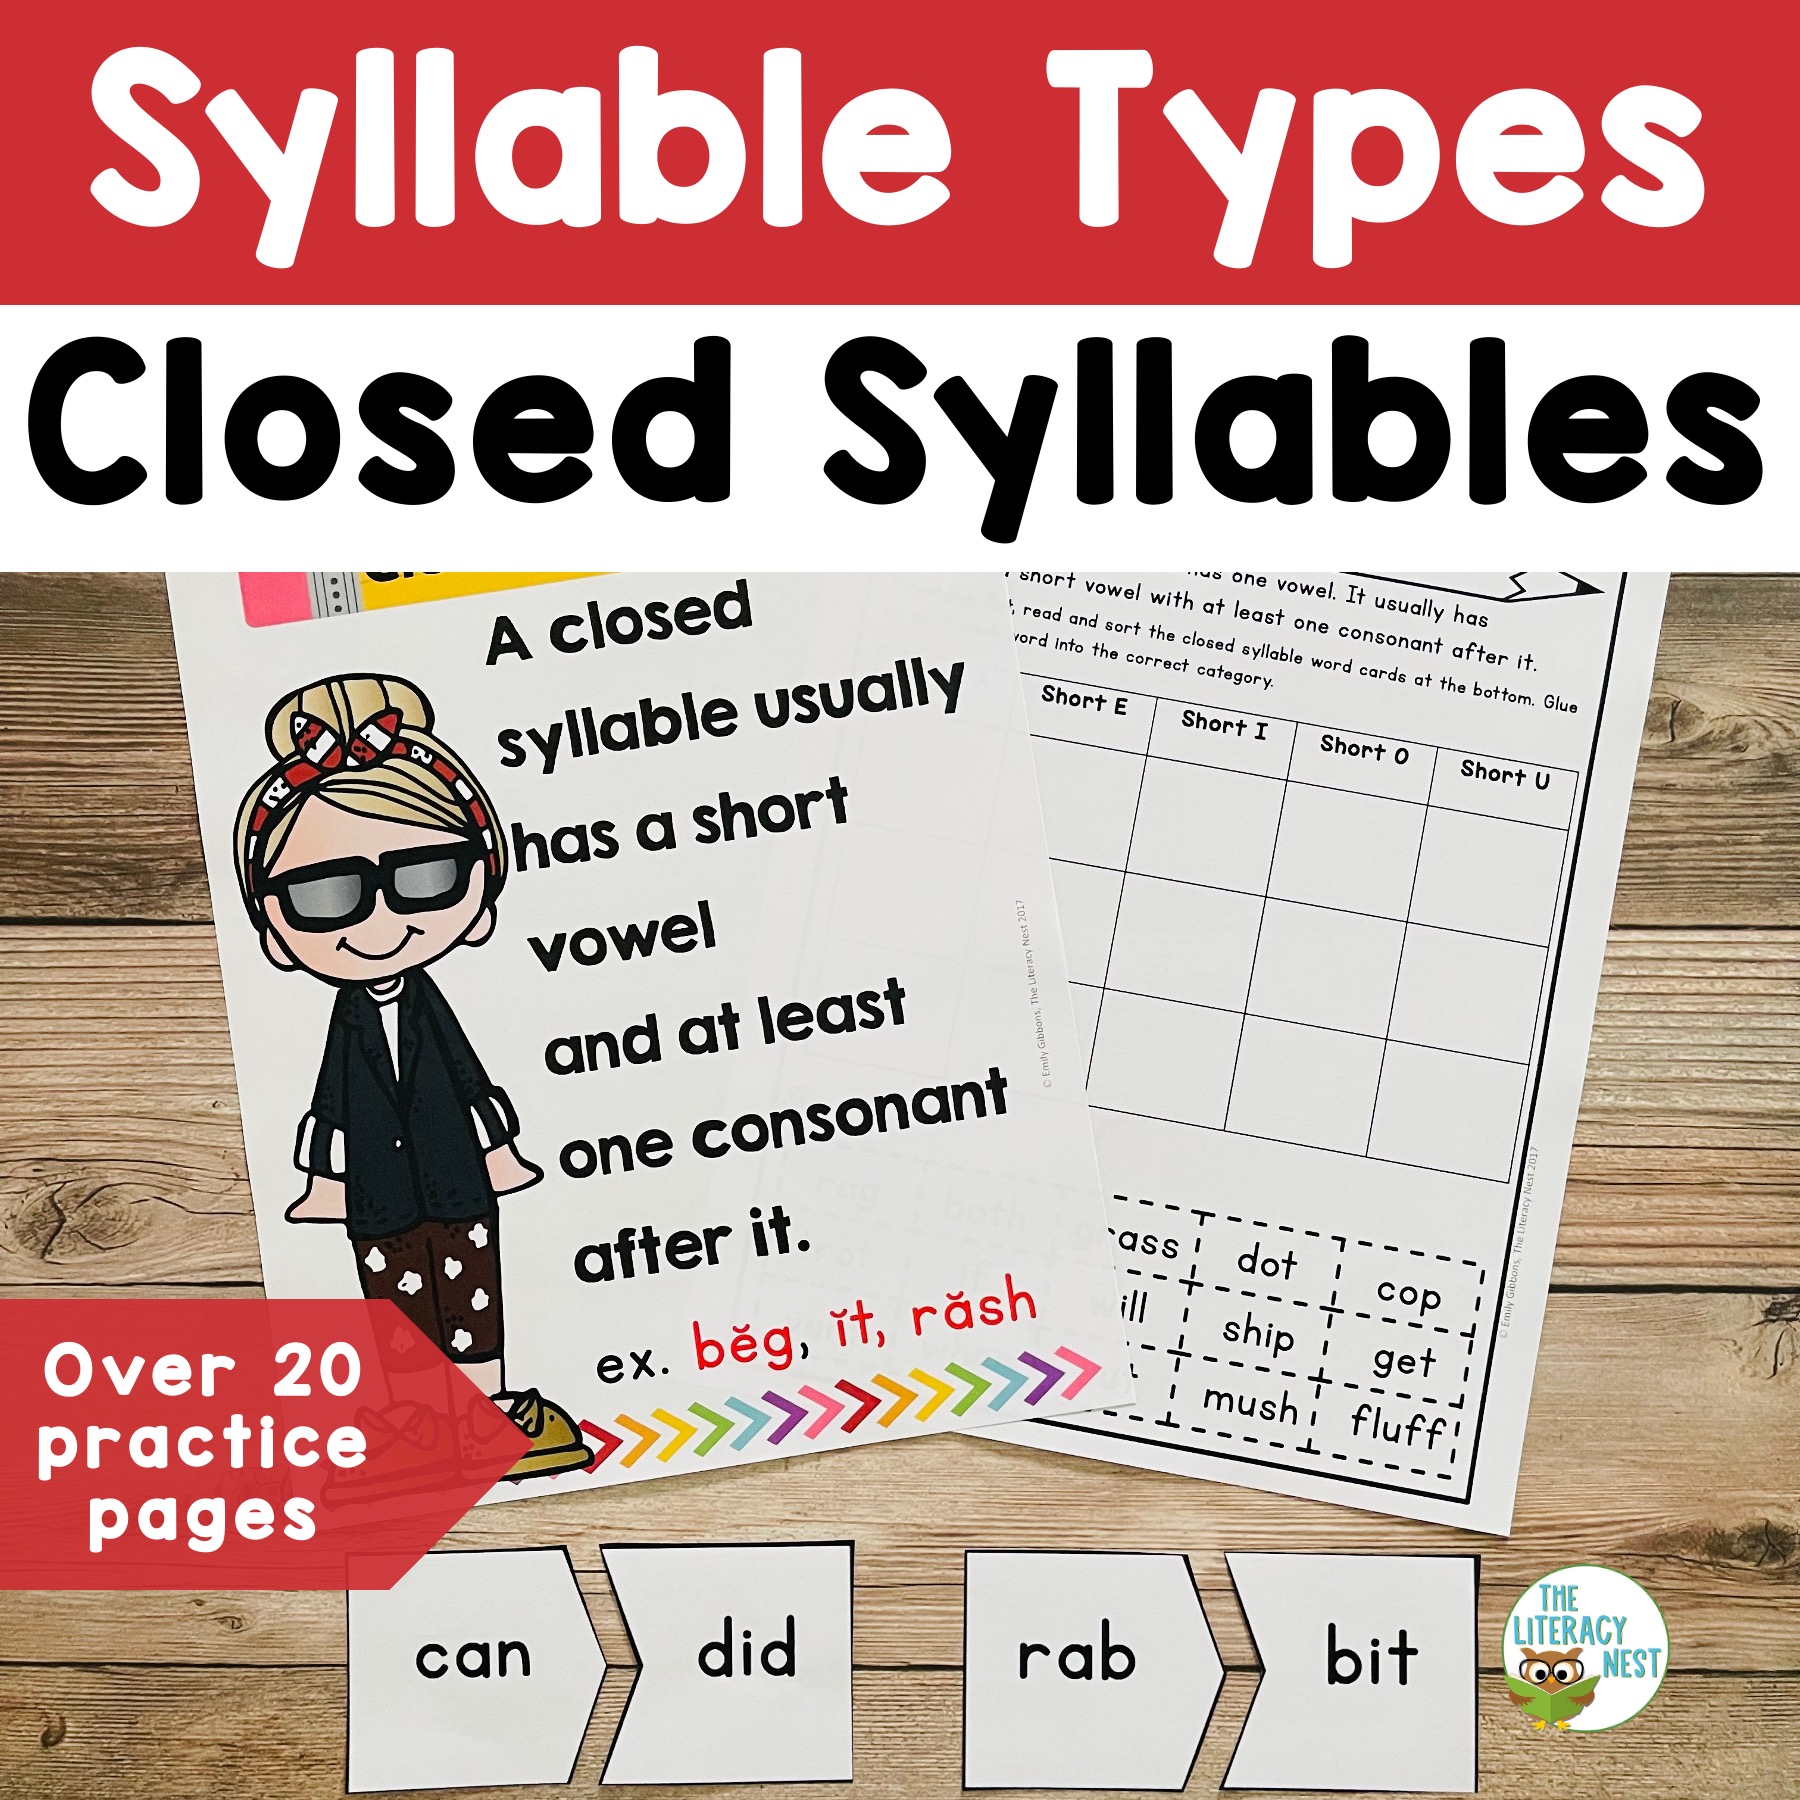 Decodable Readers Multisyllables Open Syllables Books and Lesson